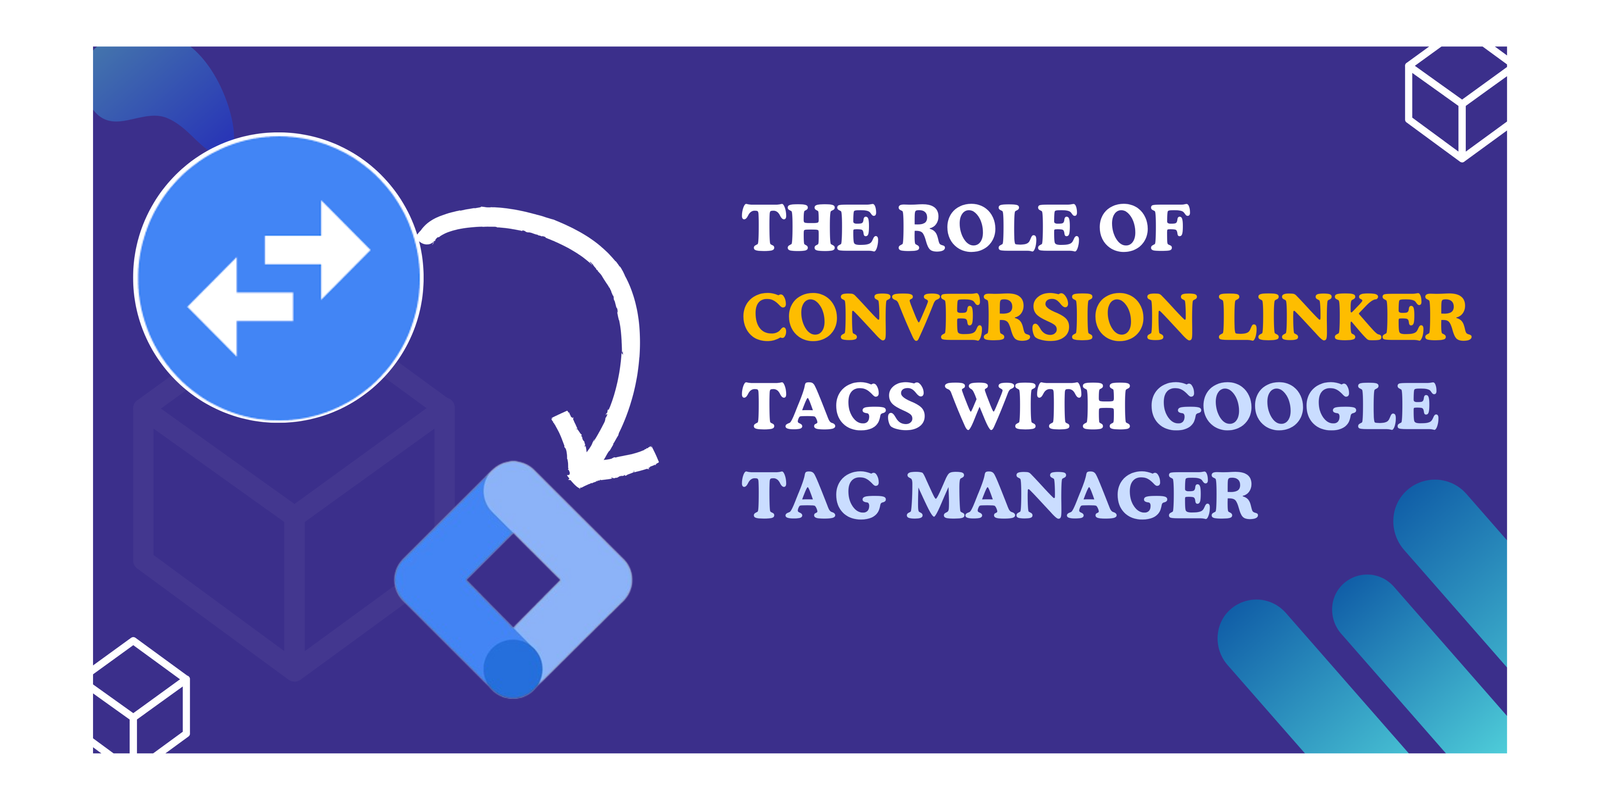 The Role of Conversion Linker Tags with Google Tag Manager